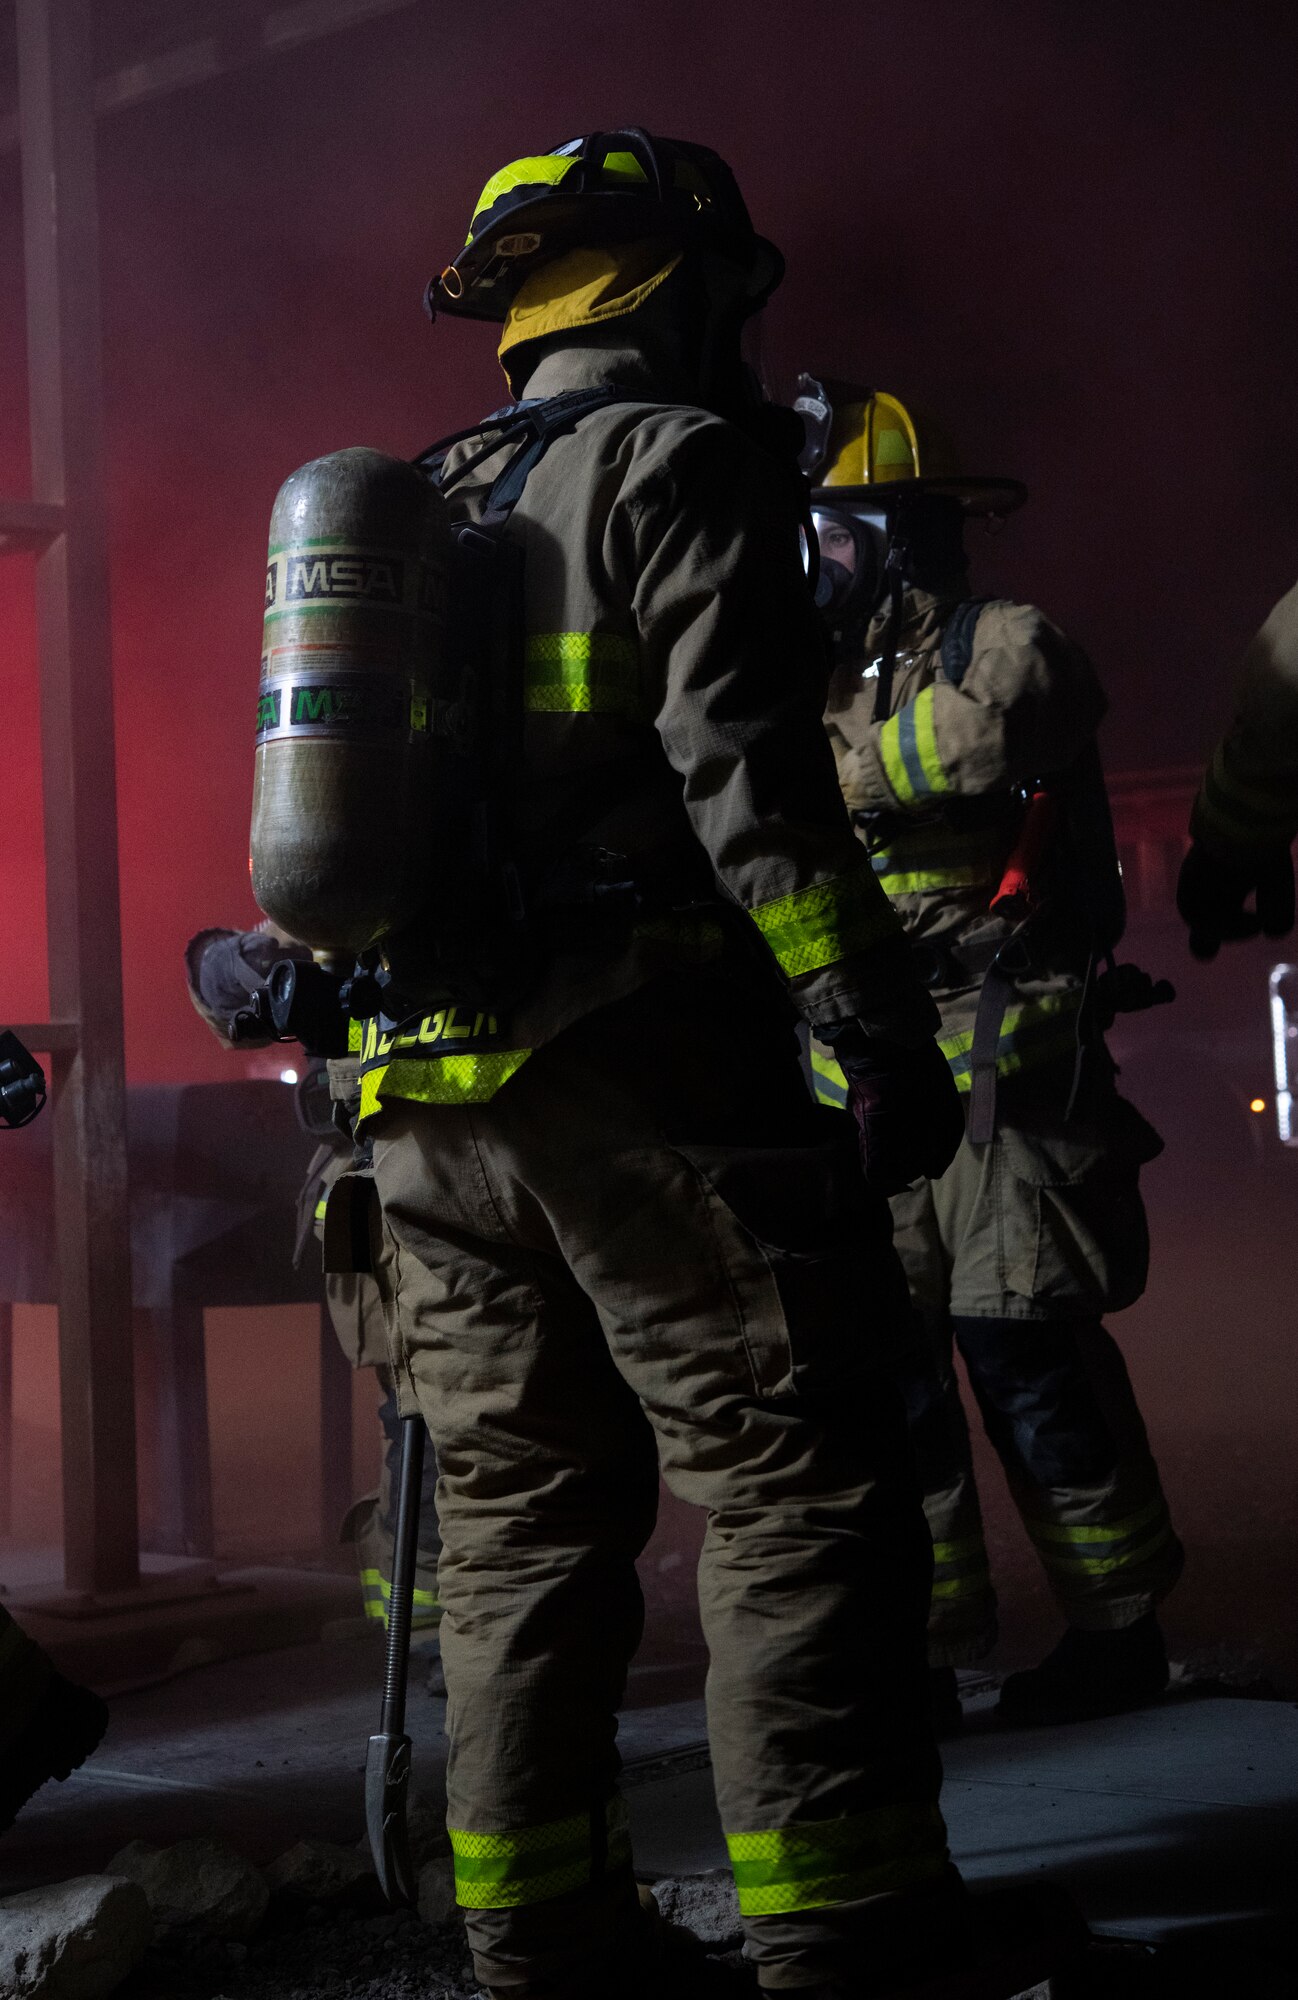 A U.S. Air Force firefighter assigned to the 386th Civil Engineer Squadron prepares to enter a building during the Air and Missile Defense Exercise 21-1 at Ali Al Salem Air Base, Kuwait, Oct. 22, 2020.